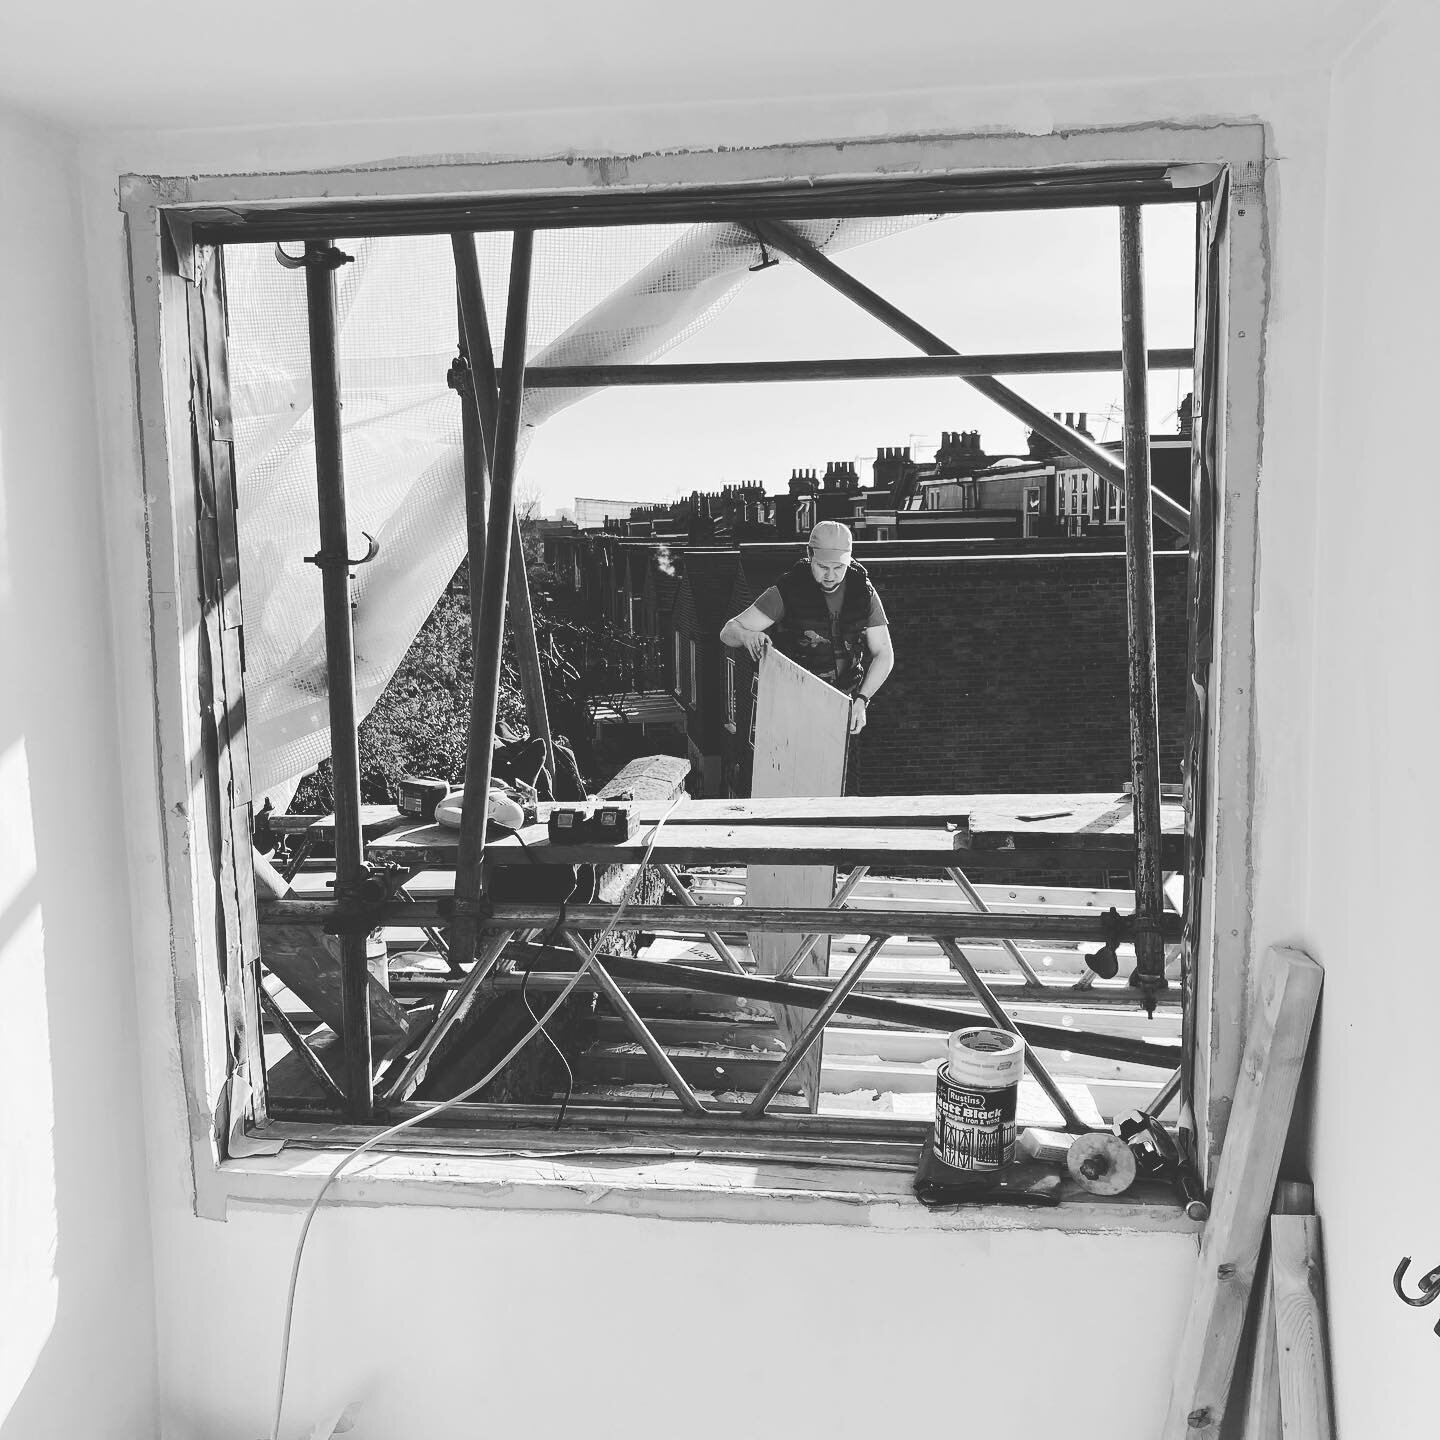 Site visit this morning on this loft conversion in Kensal Rise where we are starting to see past the scaffolding. 
.
.
#sitevisit 
#loftconversion 
#newhomeoffice
#homeofficedecor 
#largewindow
#dryingplaster 
#lastweeksonsite
#claudiaurvois 
#claudi